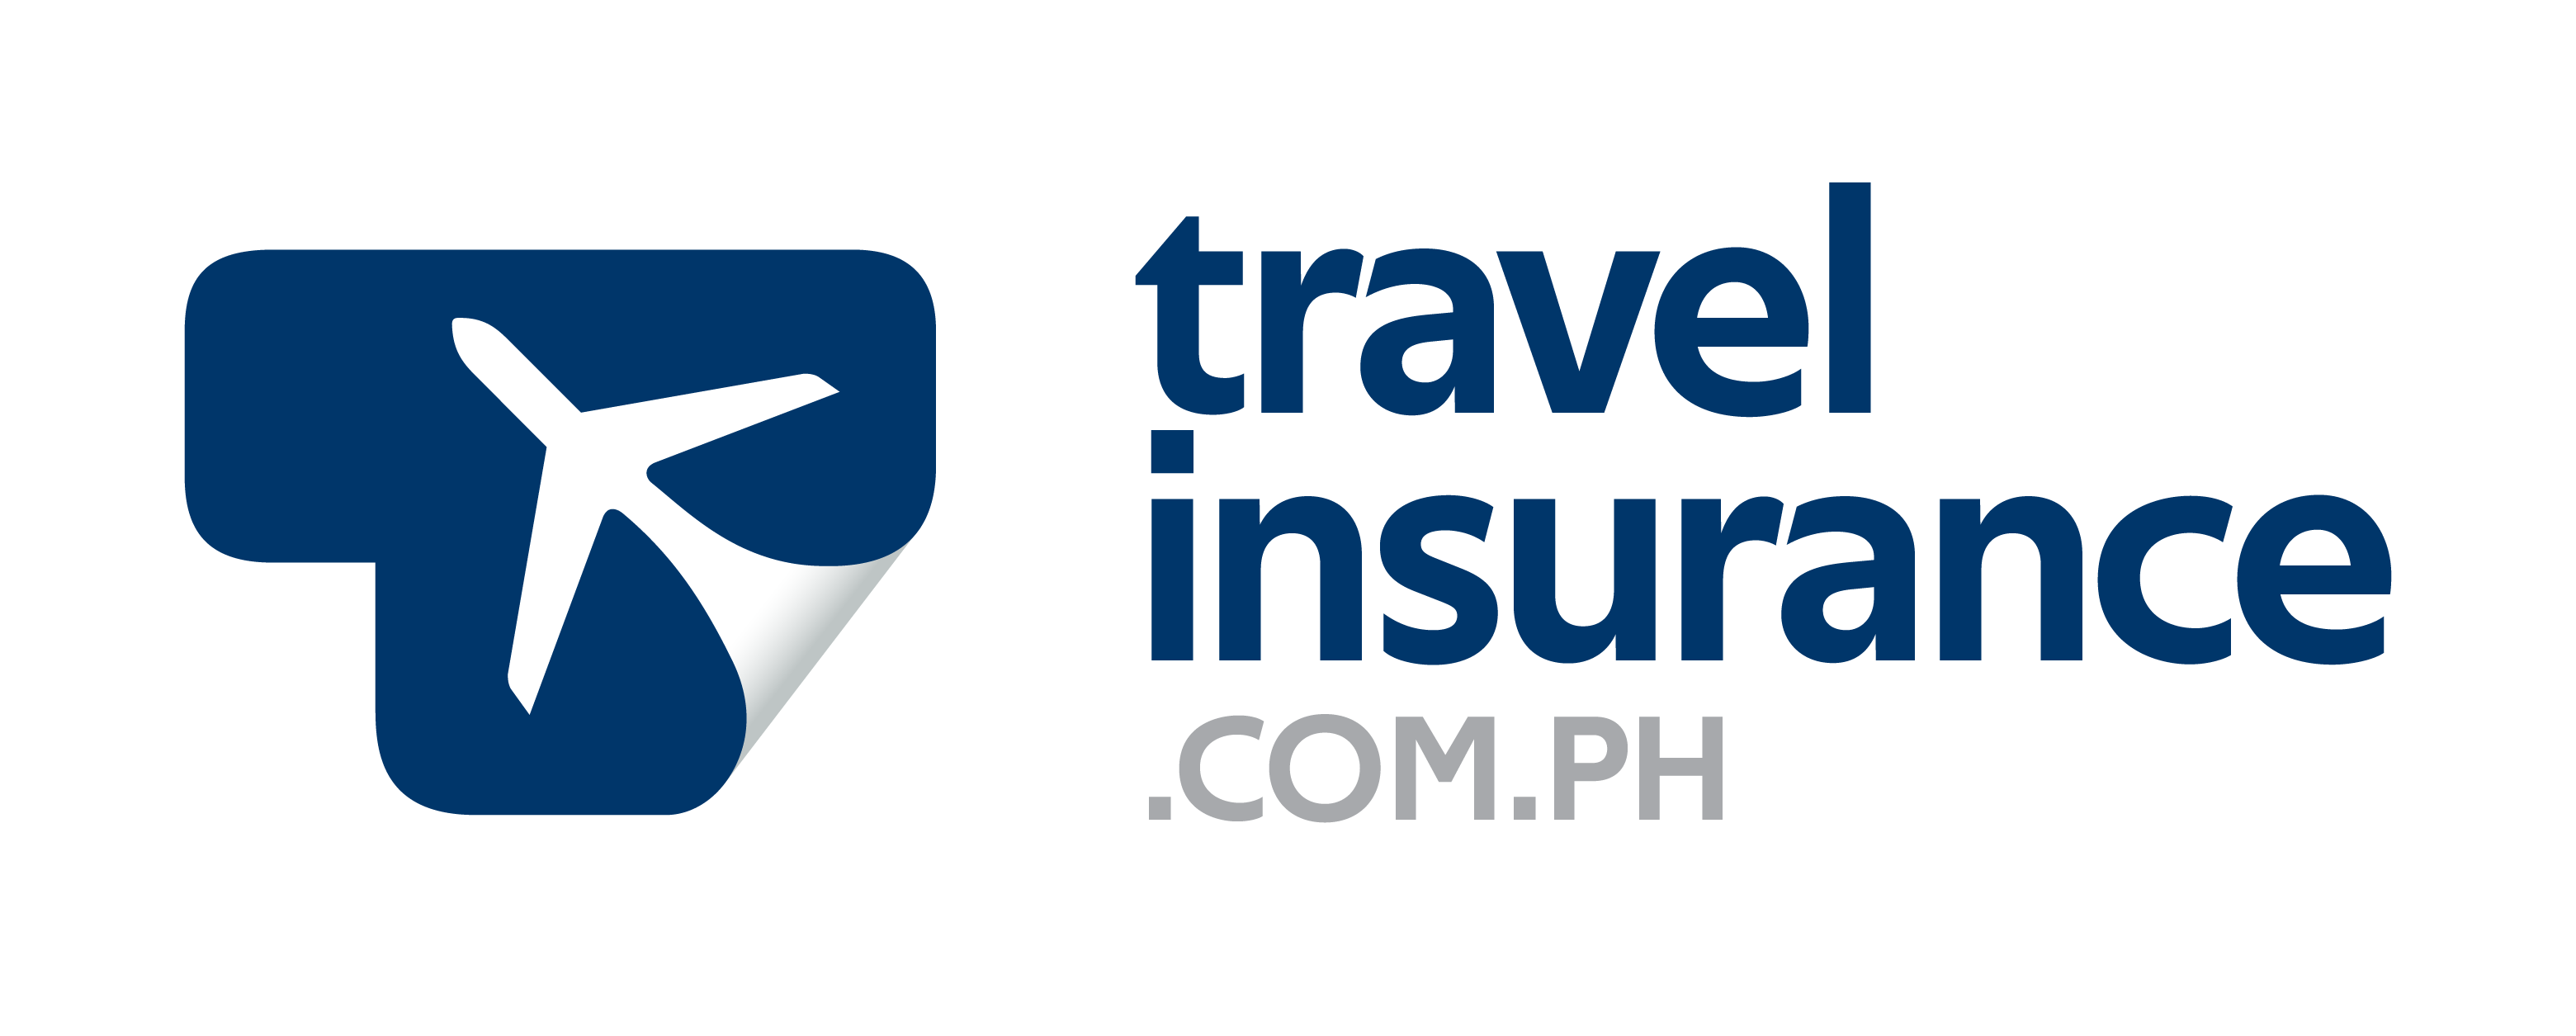 starr travel insurance philippines review